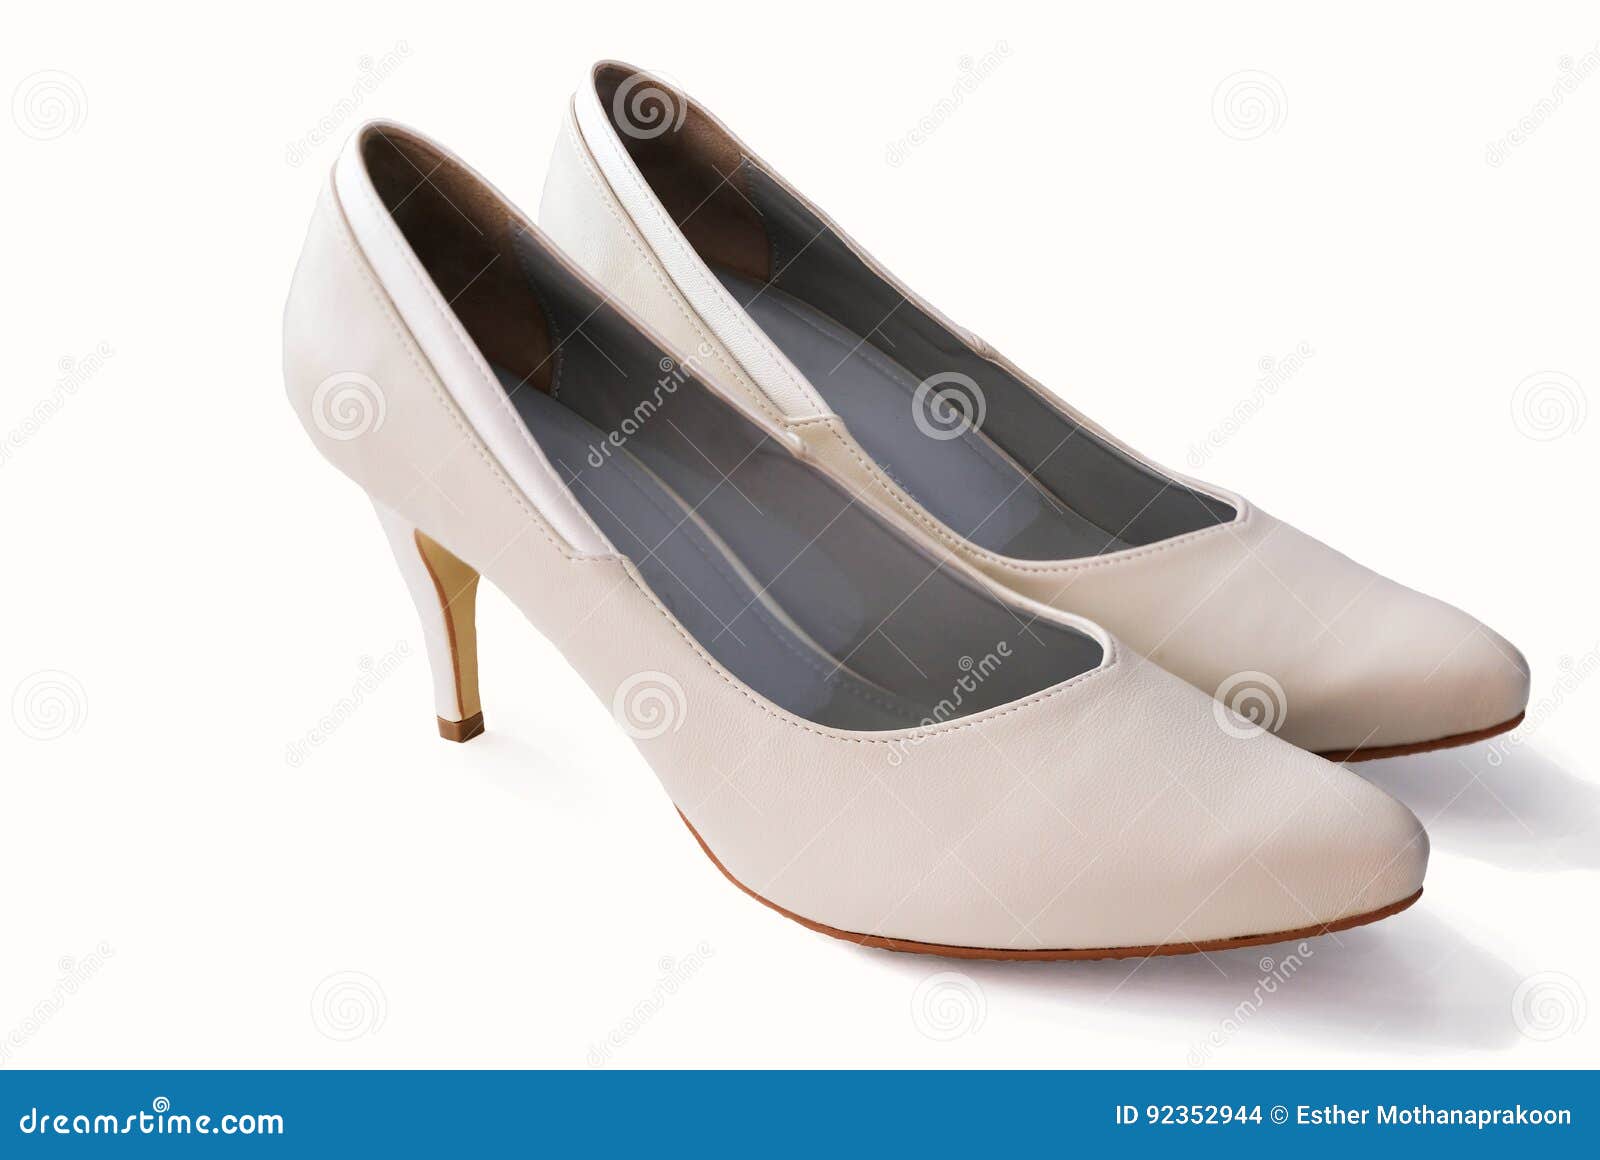 White Leather High Heels Isolated on White Background Stock Photo ...